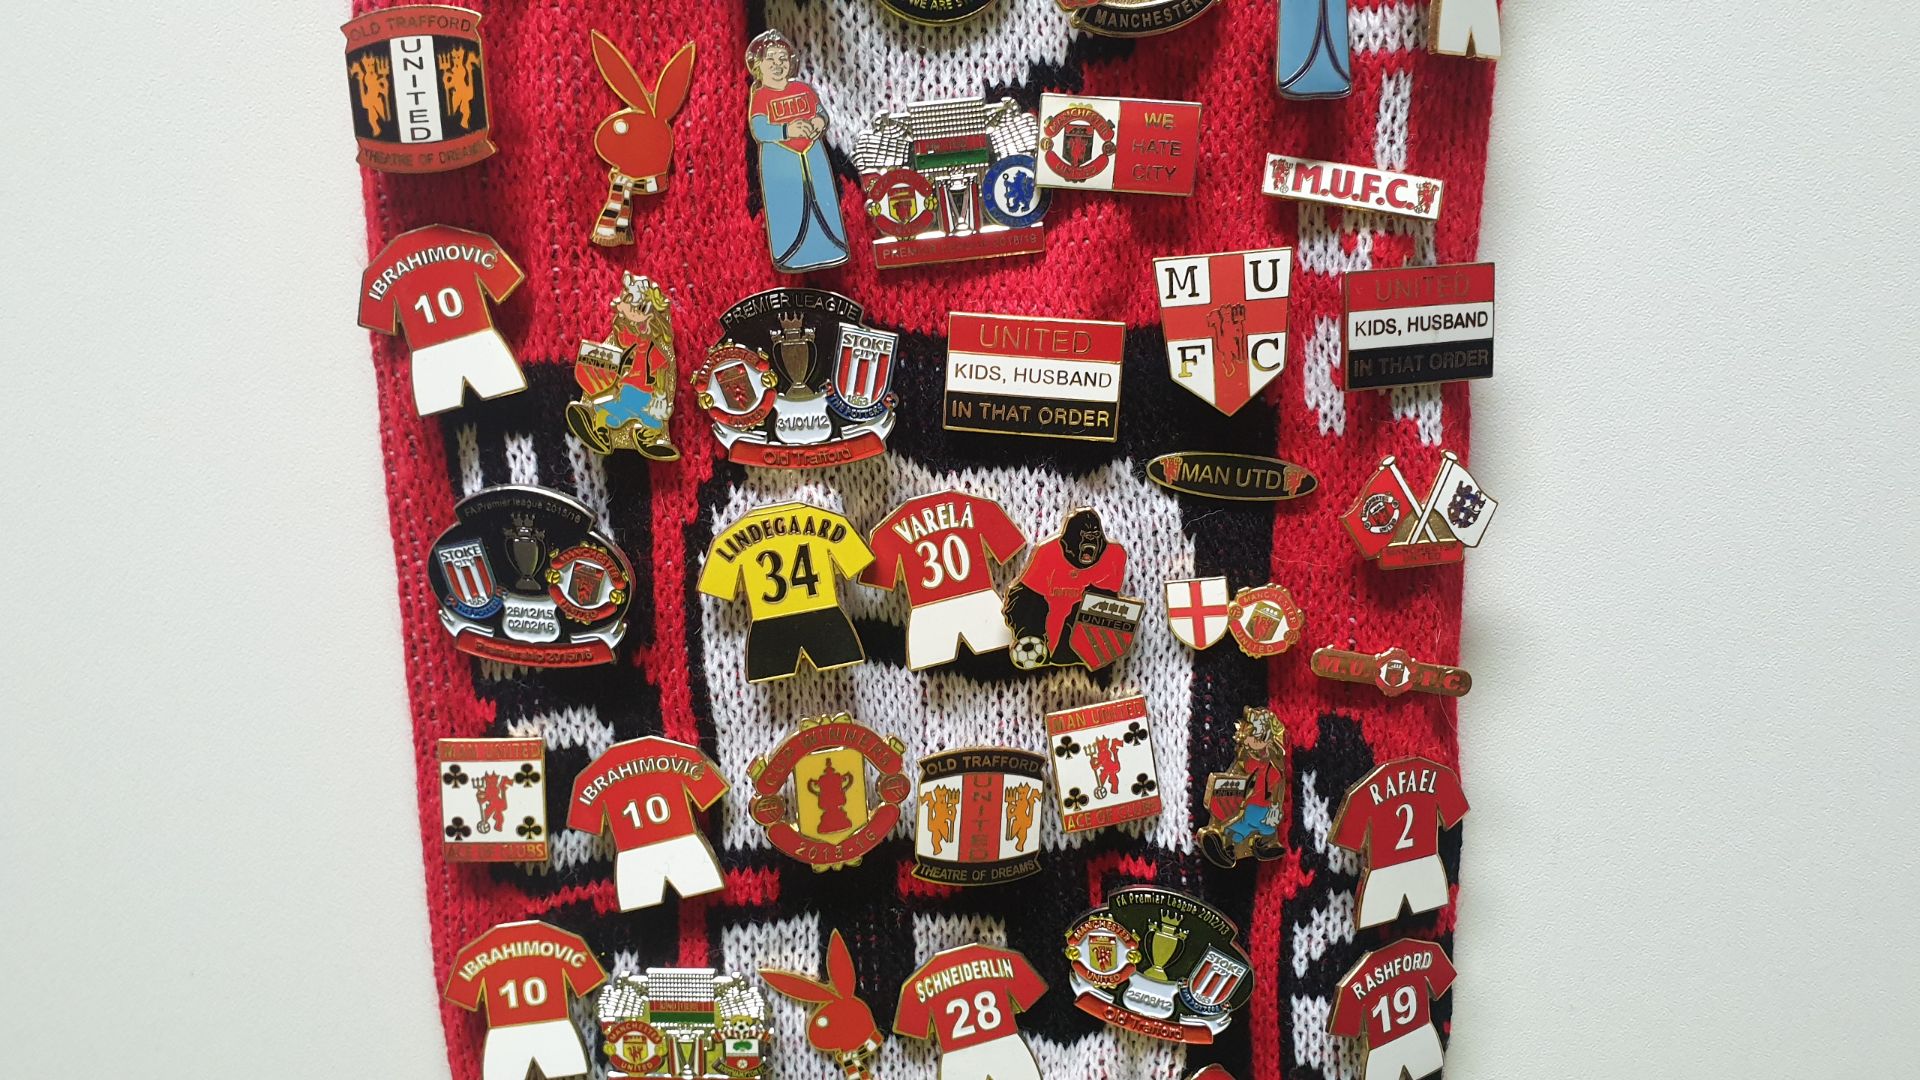 MANCHESTER UNITED SCARF CONTAINING APPROX 260 X PIN BADGES IE FA CUP WINNER 2018, WE HATE CITY, - Image 6 of 8